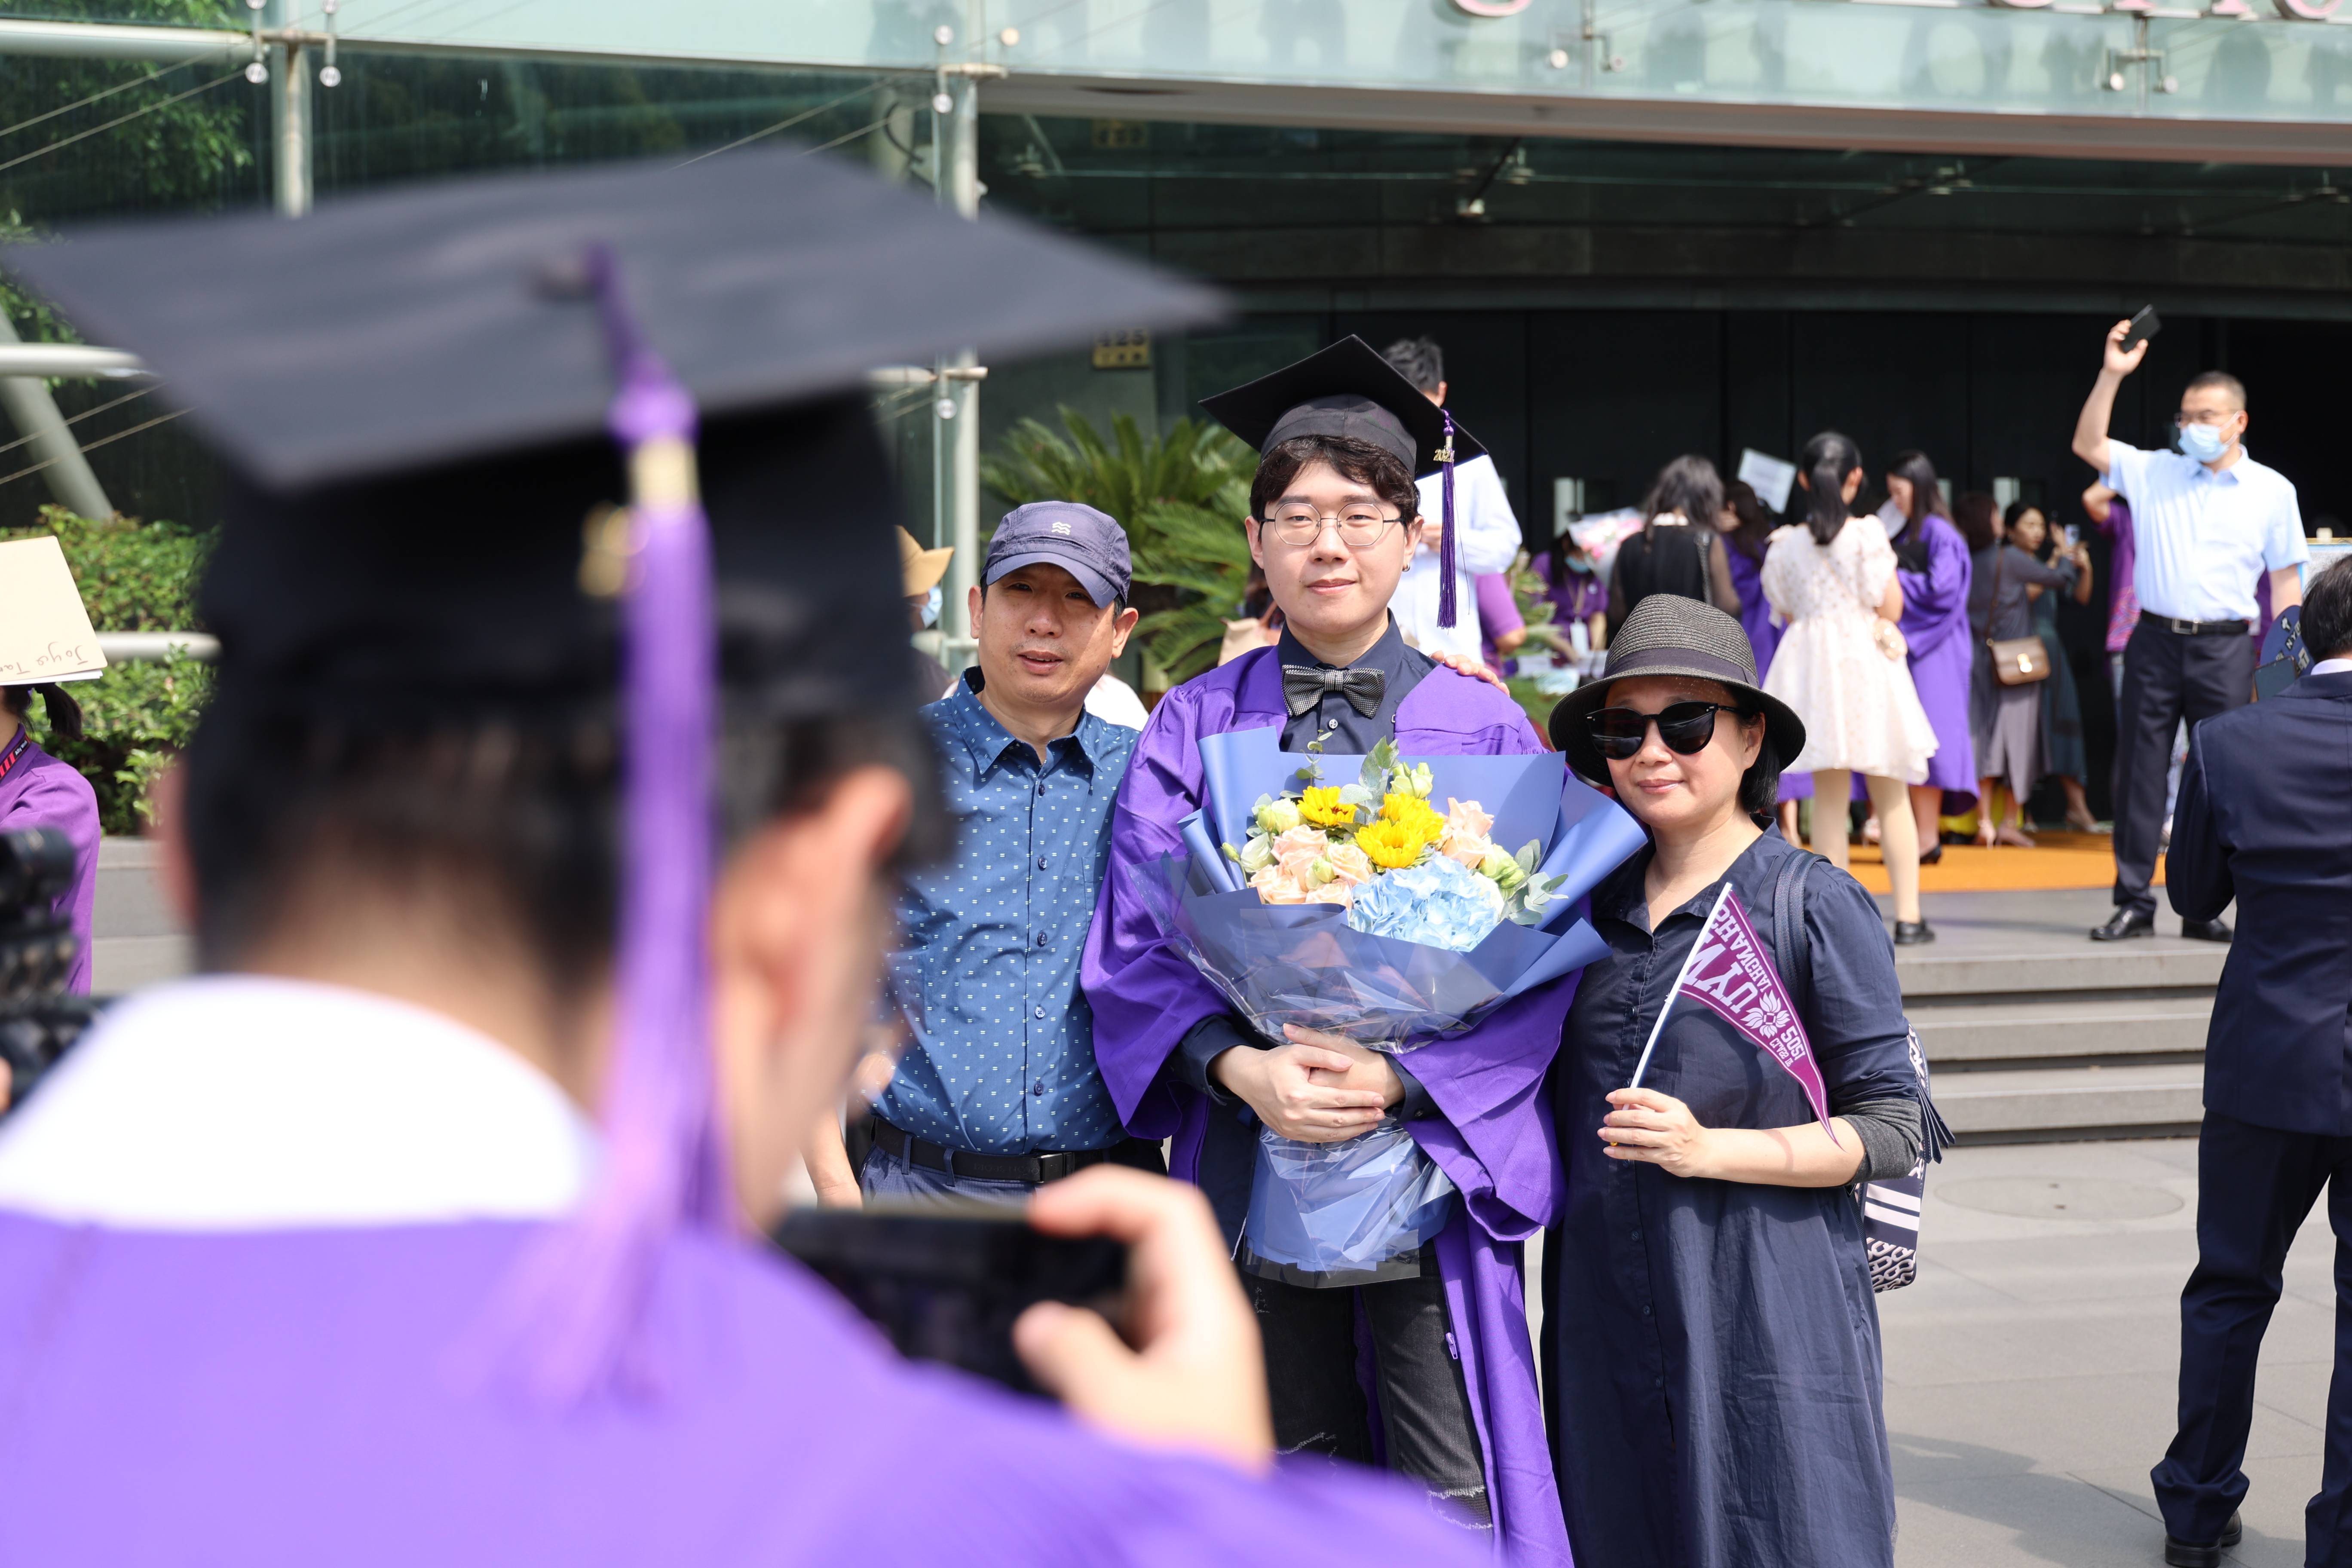 Grad takes photo of classmate posing with his parents